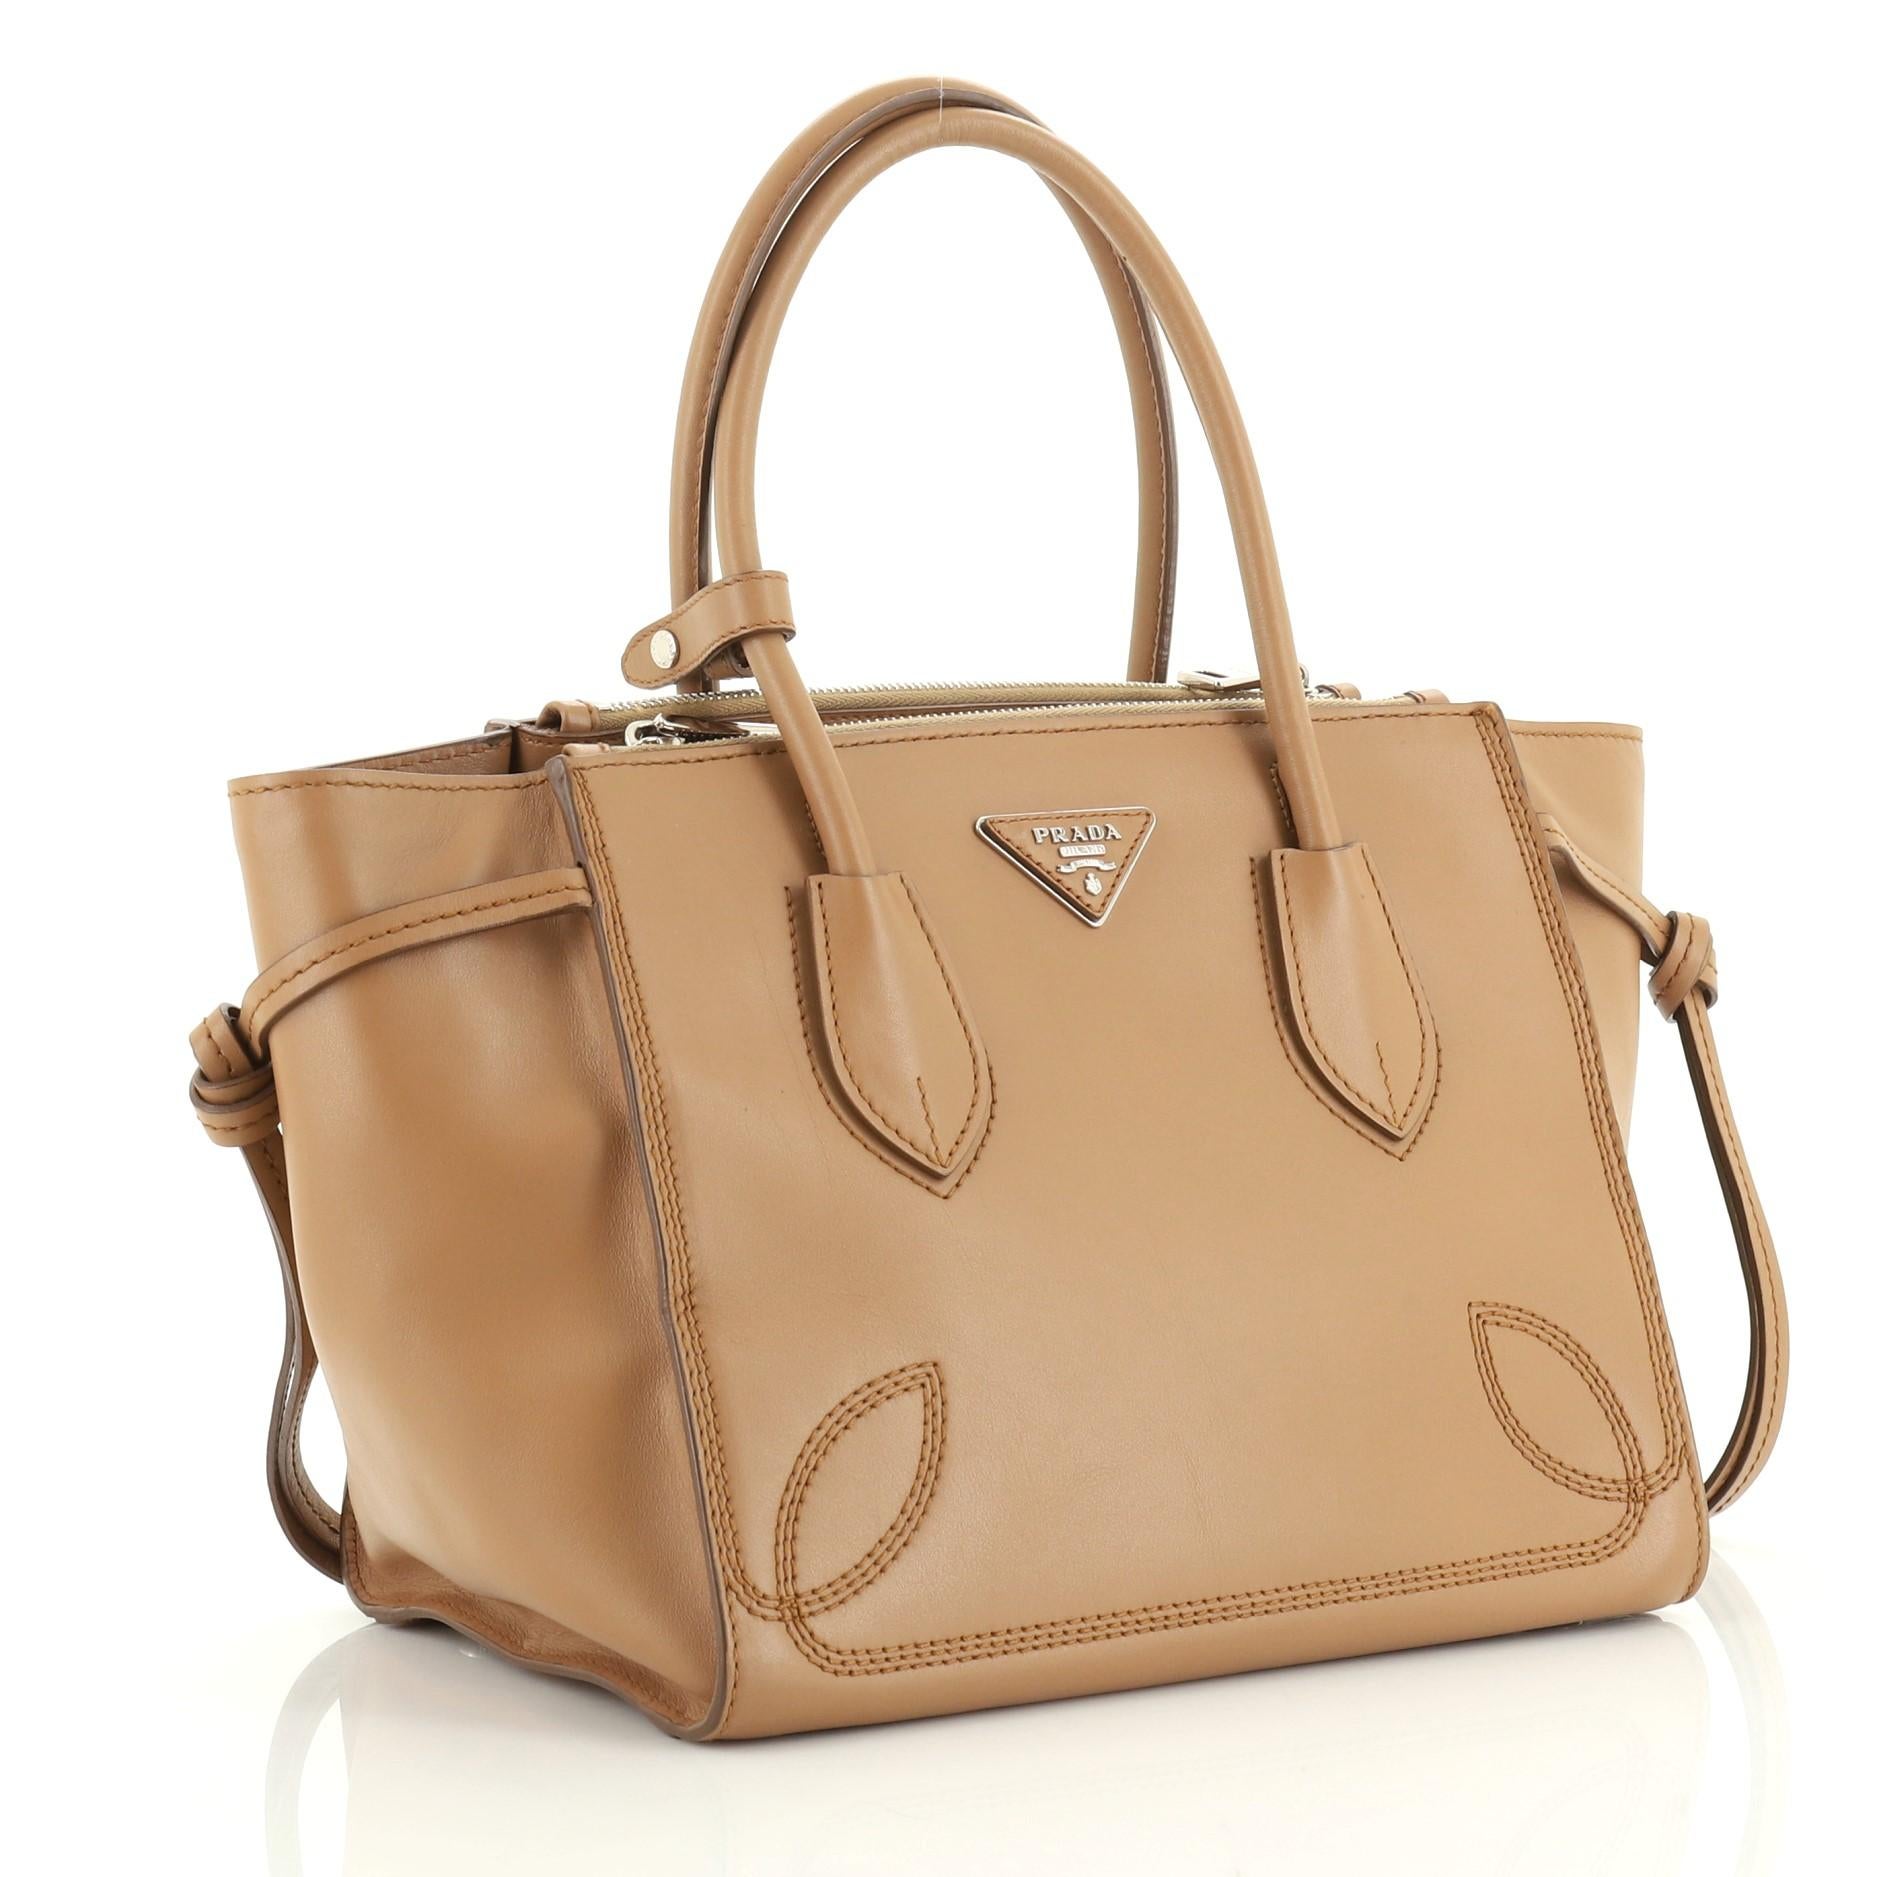 This Prada Tassel Twin Pocket Tote City Calf Small, crafted from brown calf leather, features dual rolled handles, leather tassels at the sides, and silver-tone hardware. It opens to a neutral fabric interior with zip closures and an open top middle